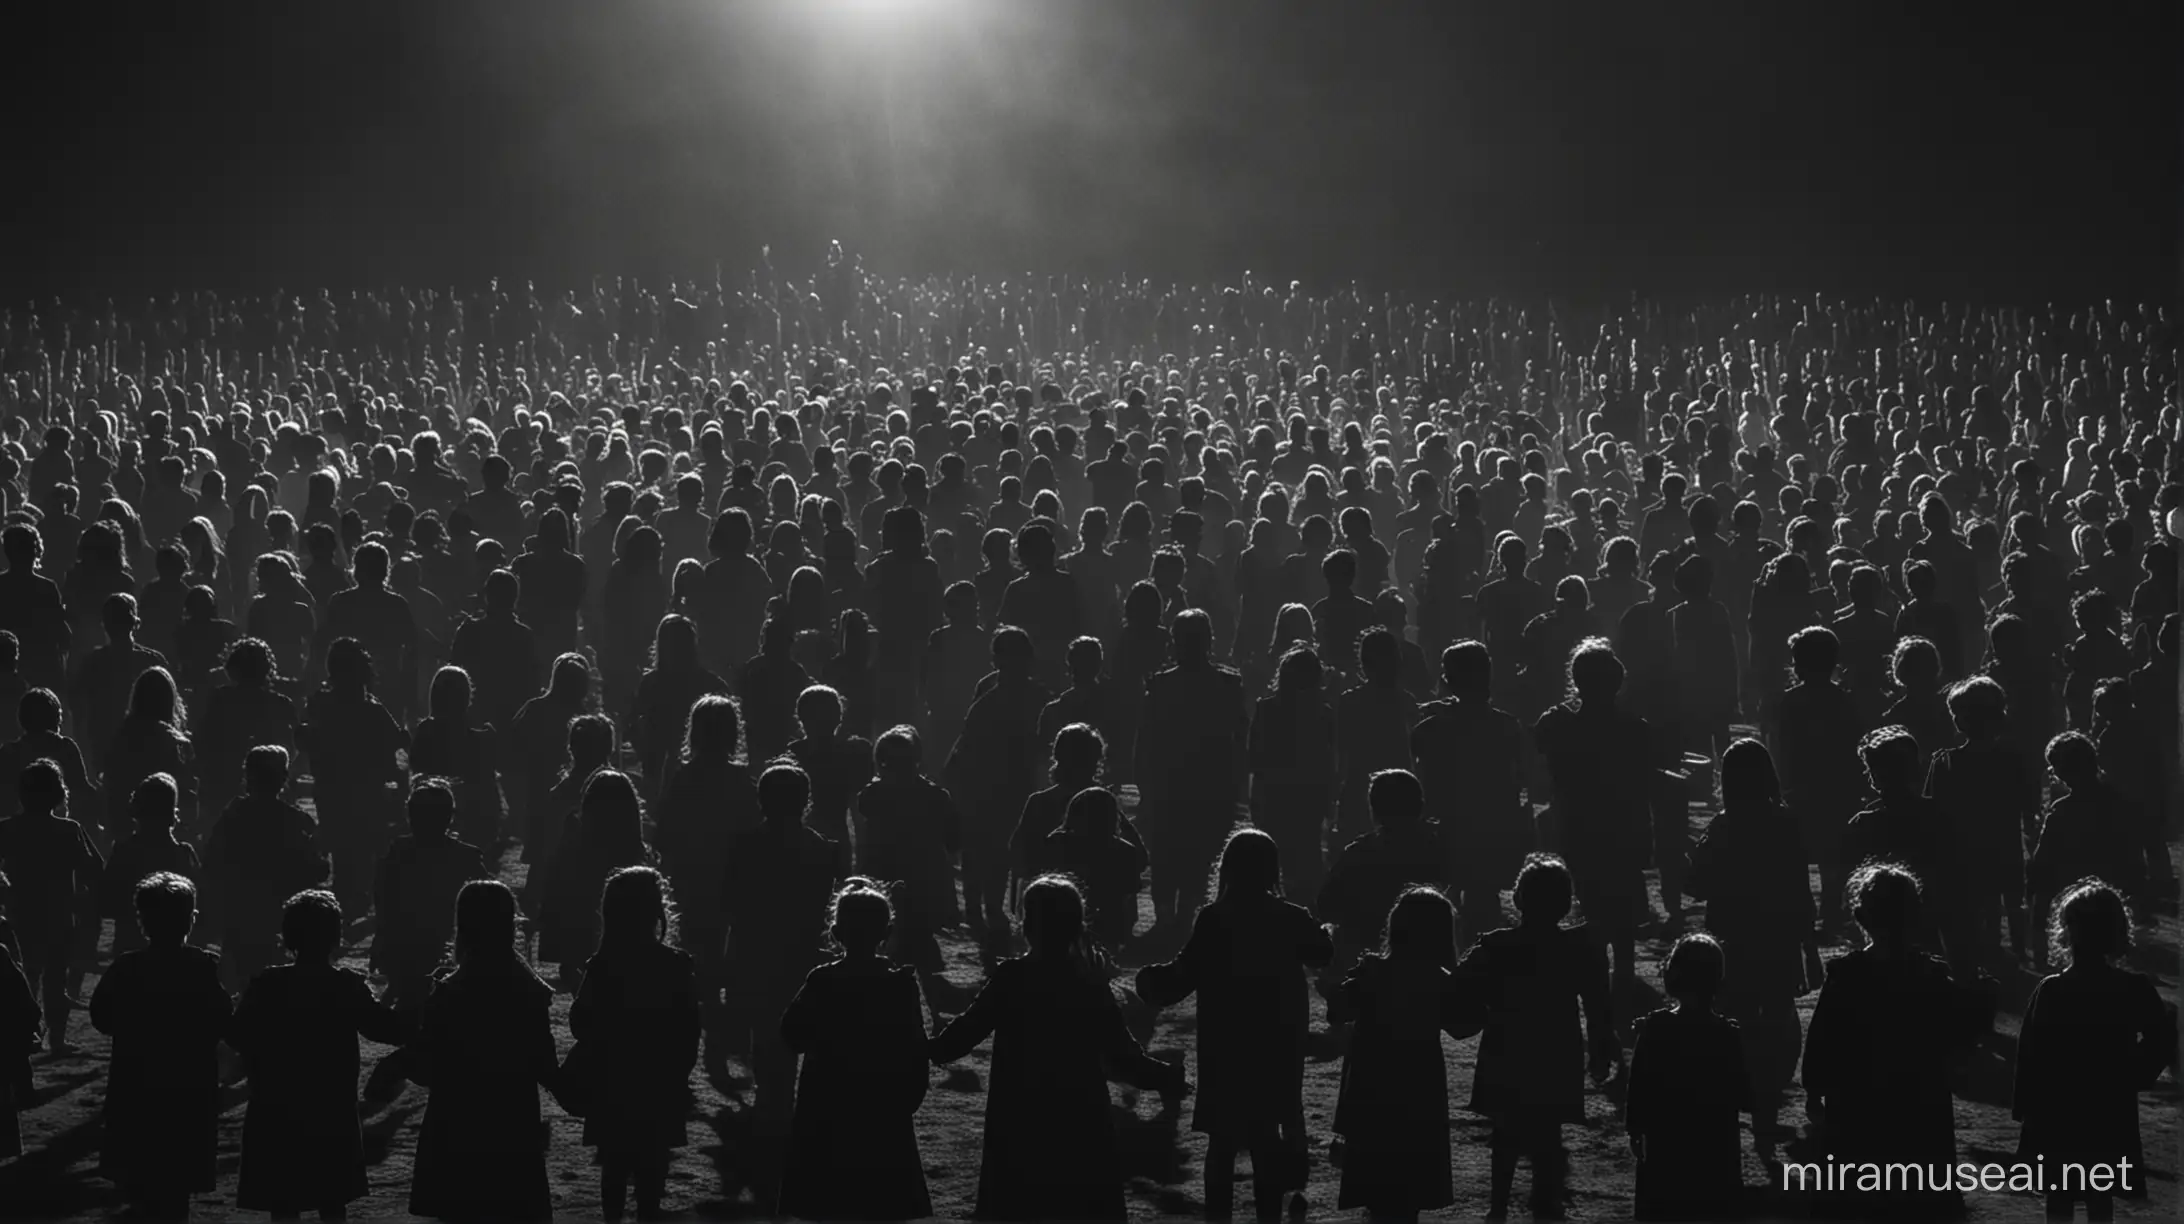 Hundreds of silhouetted children ritualistically praise an unseen figure, dark purgatory, creepy carnival